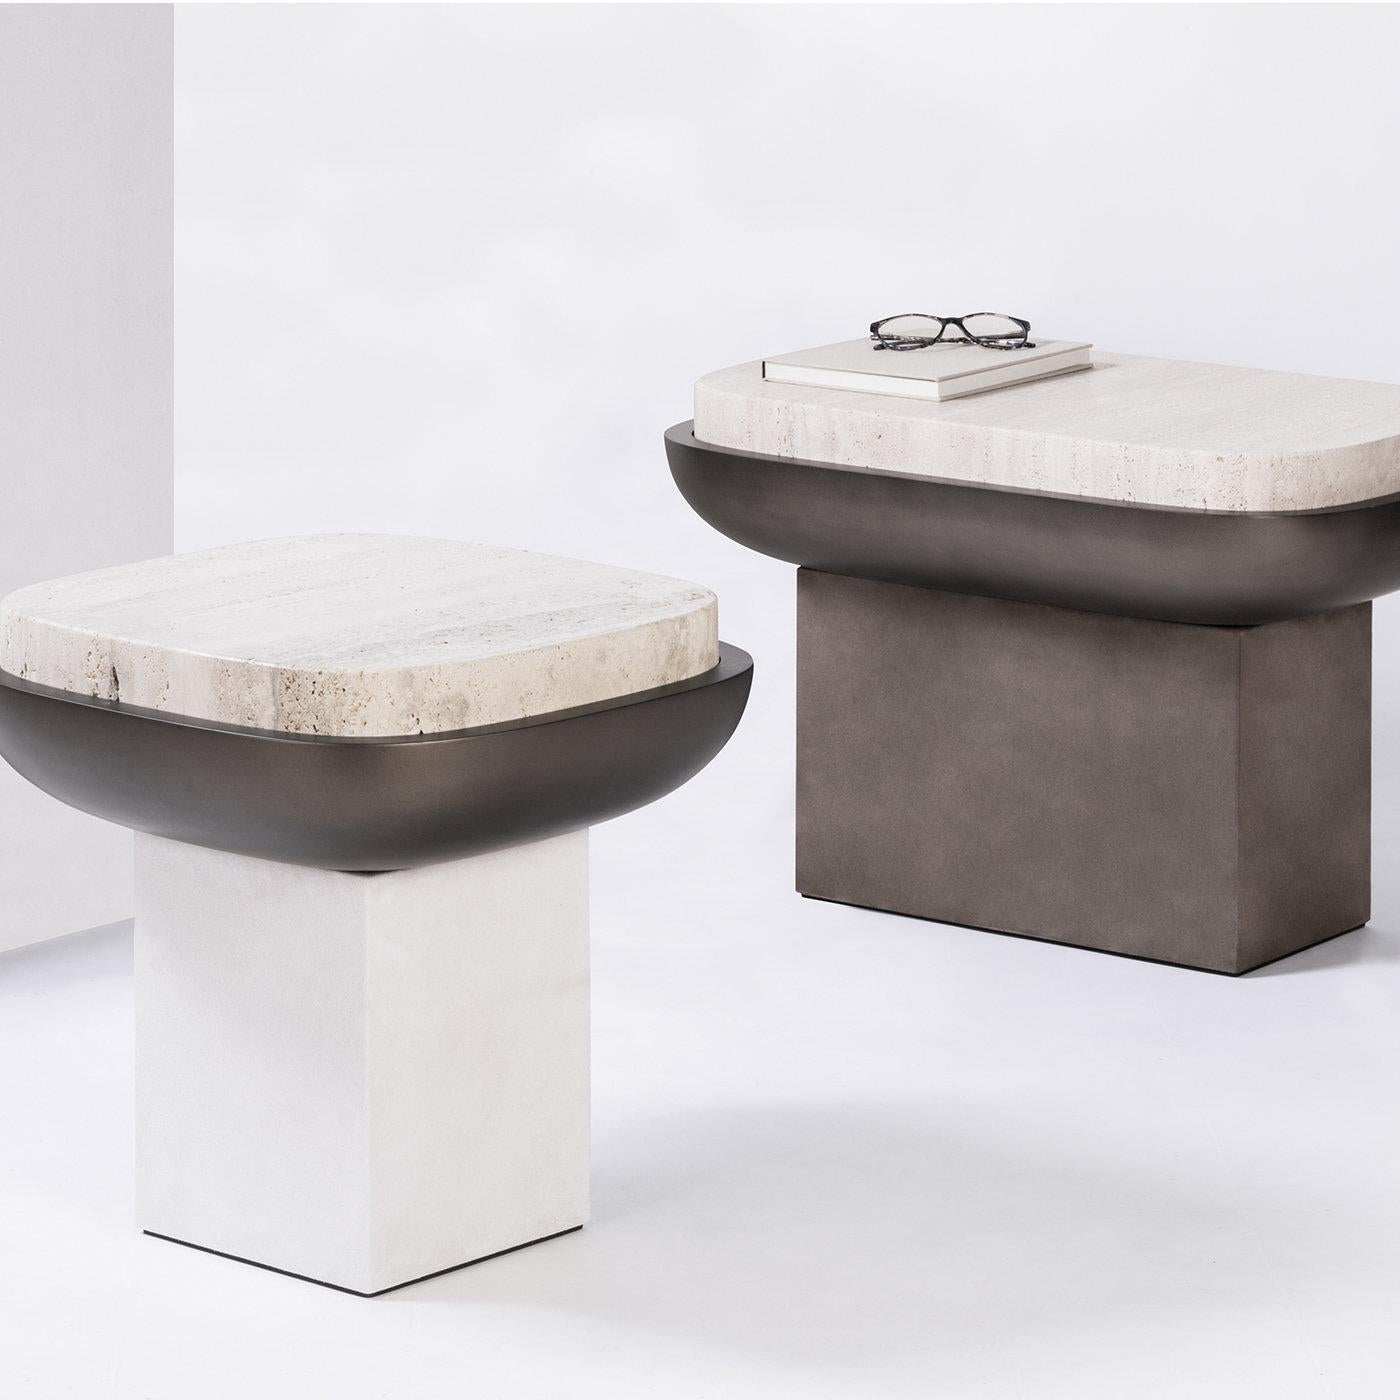 Contemporary rectangular travertine & leather side table - olympia by Stephane Parmentier for Giobagnara.
The object presented in the image has following finish: Travertine top, A24 smoke suede leather (base) and bronze-laquered wood seat